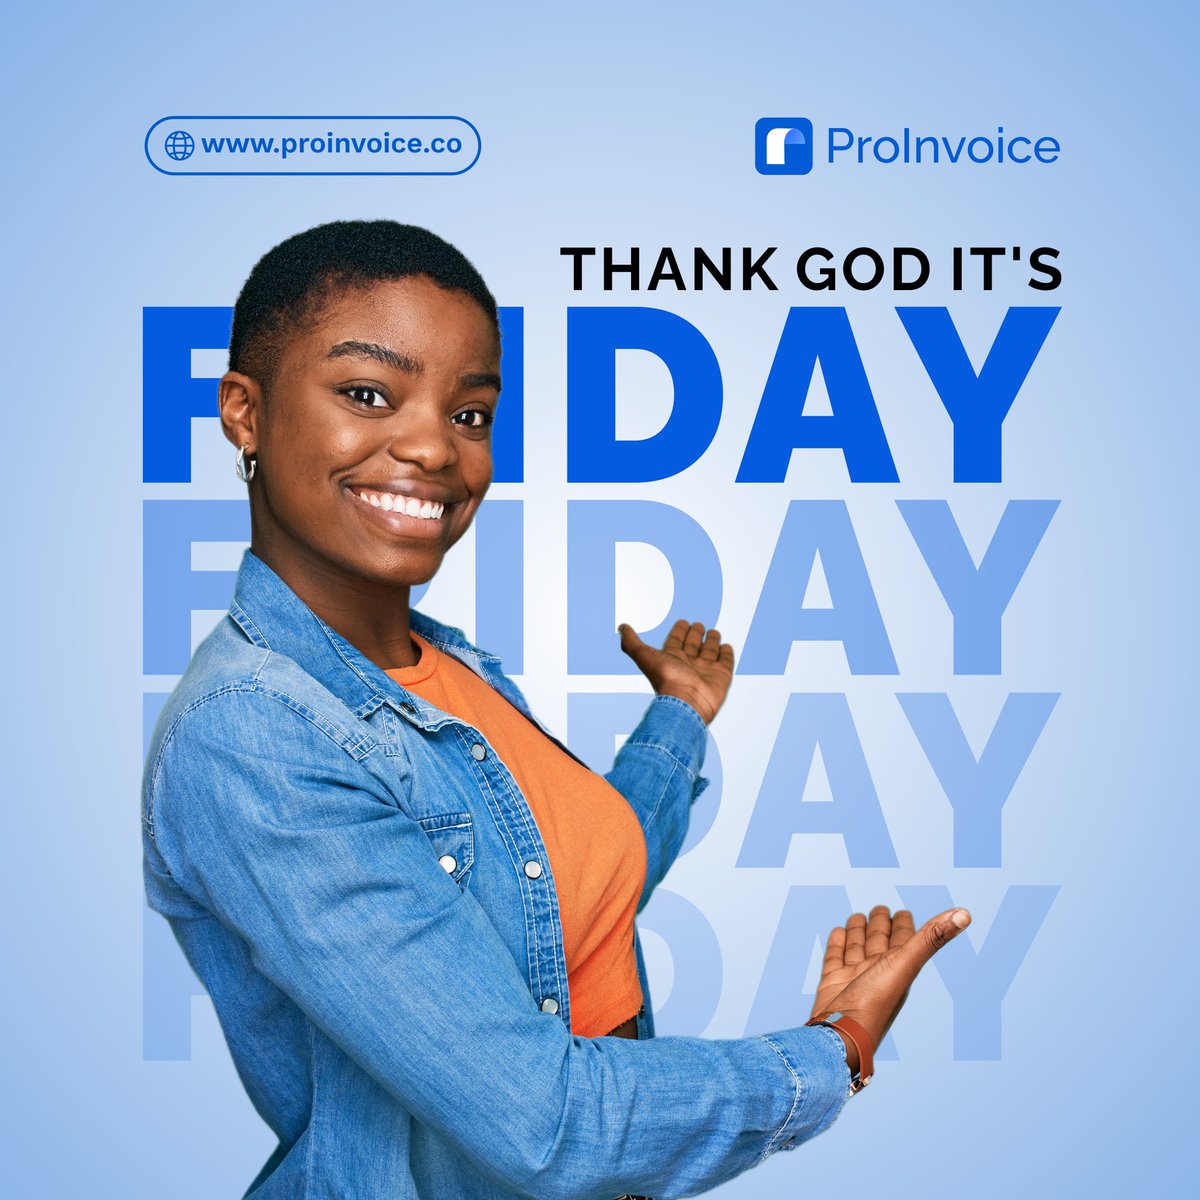 Thank God it’s Friday!!!

Time to relax and rejuvenate >>>>>> 

#InvoiceLikeAPro
#ProInvoiceBenefits
#proinvoice
#growwithproinvoice 
#TGIF